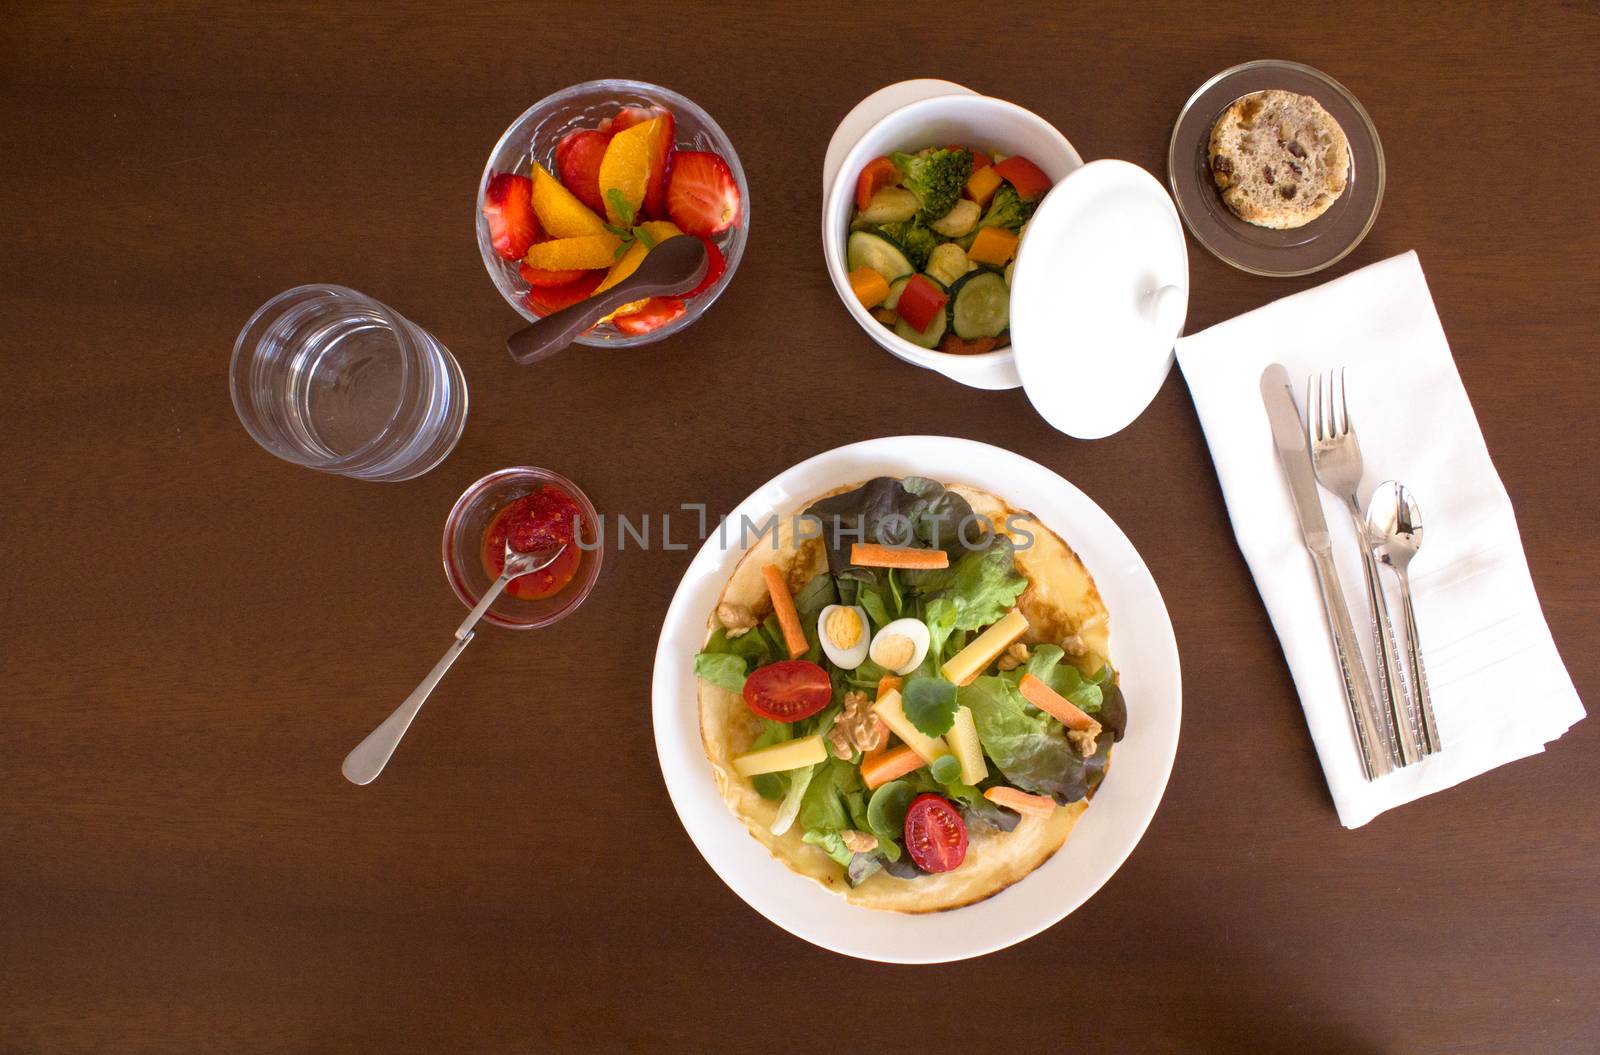 Complete healthy lunch served at table by Joanastockfoto